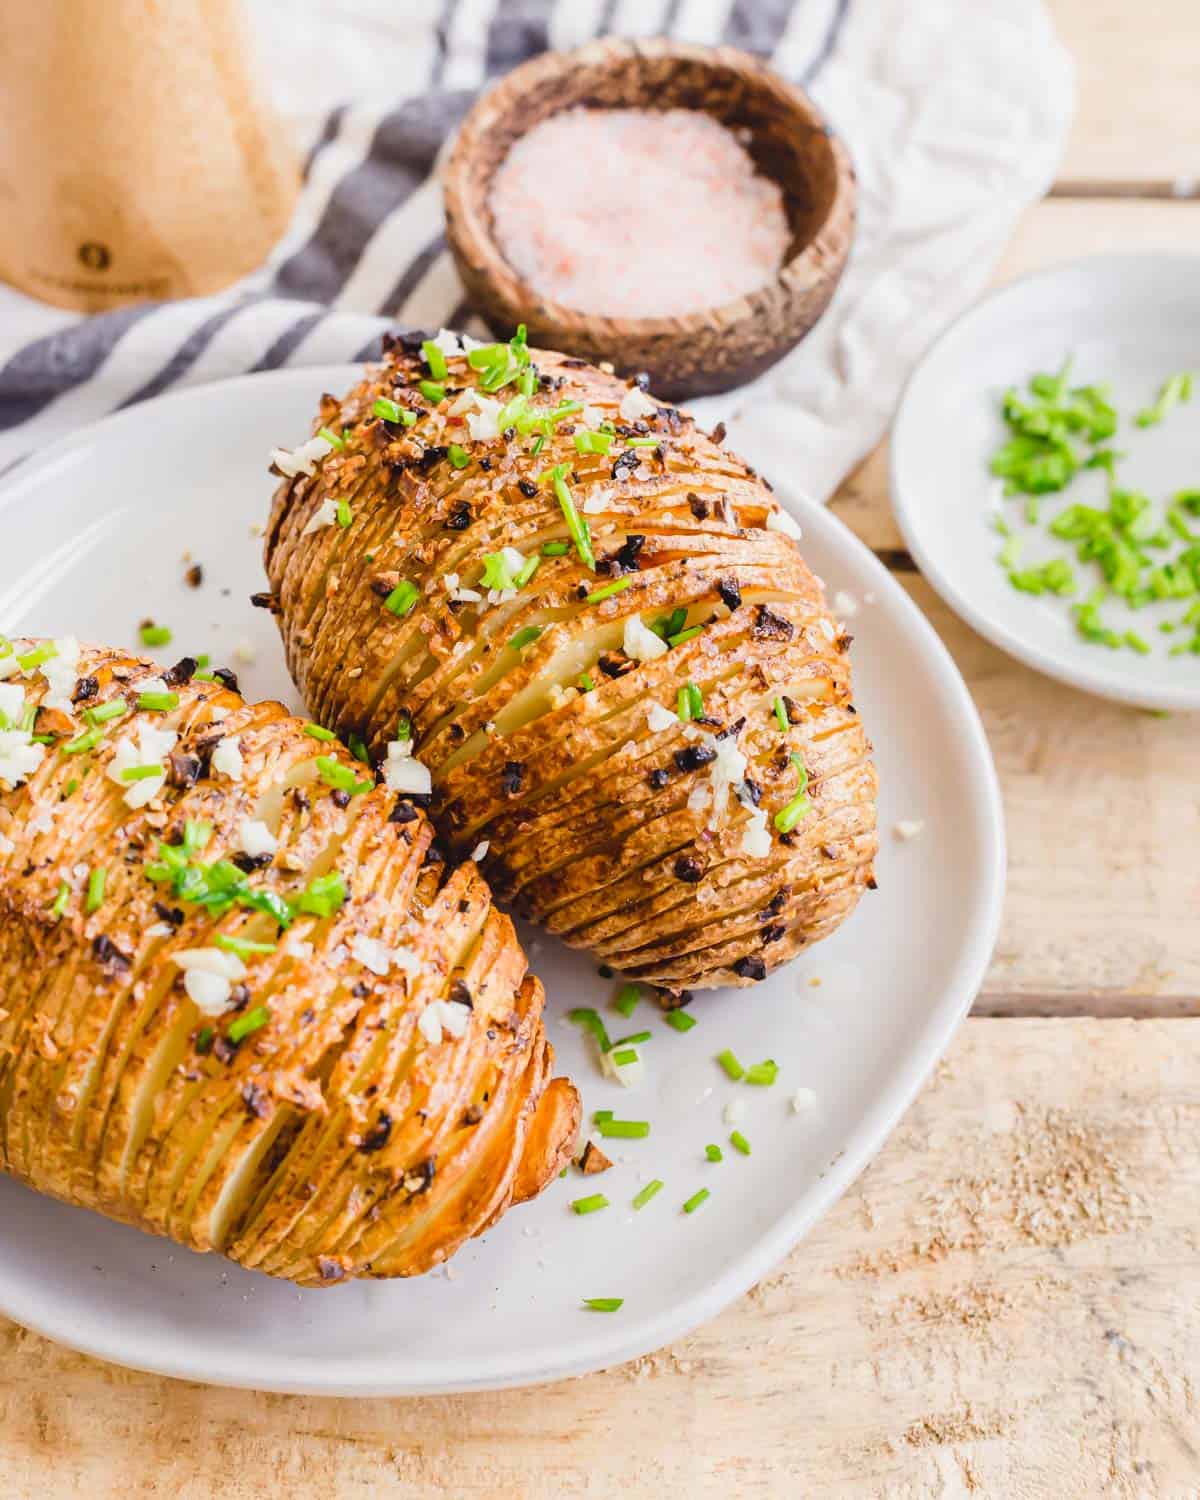 Crispy golden brown hasselback white potatoes on a plate.